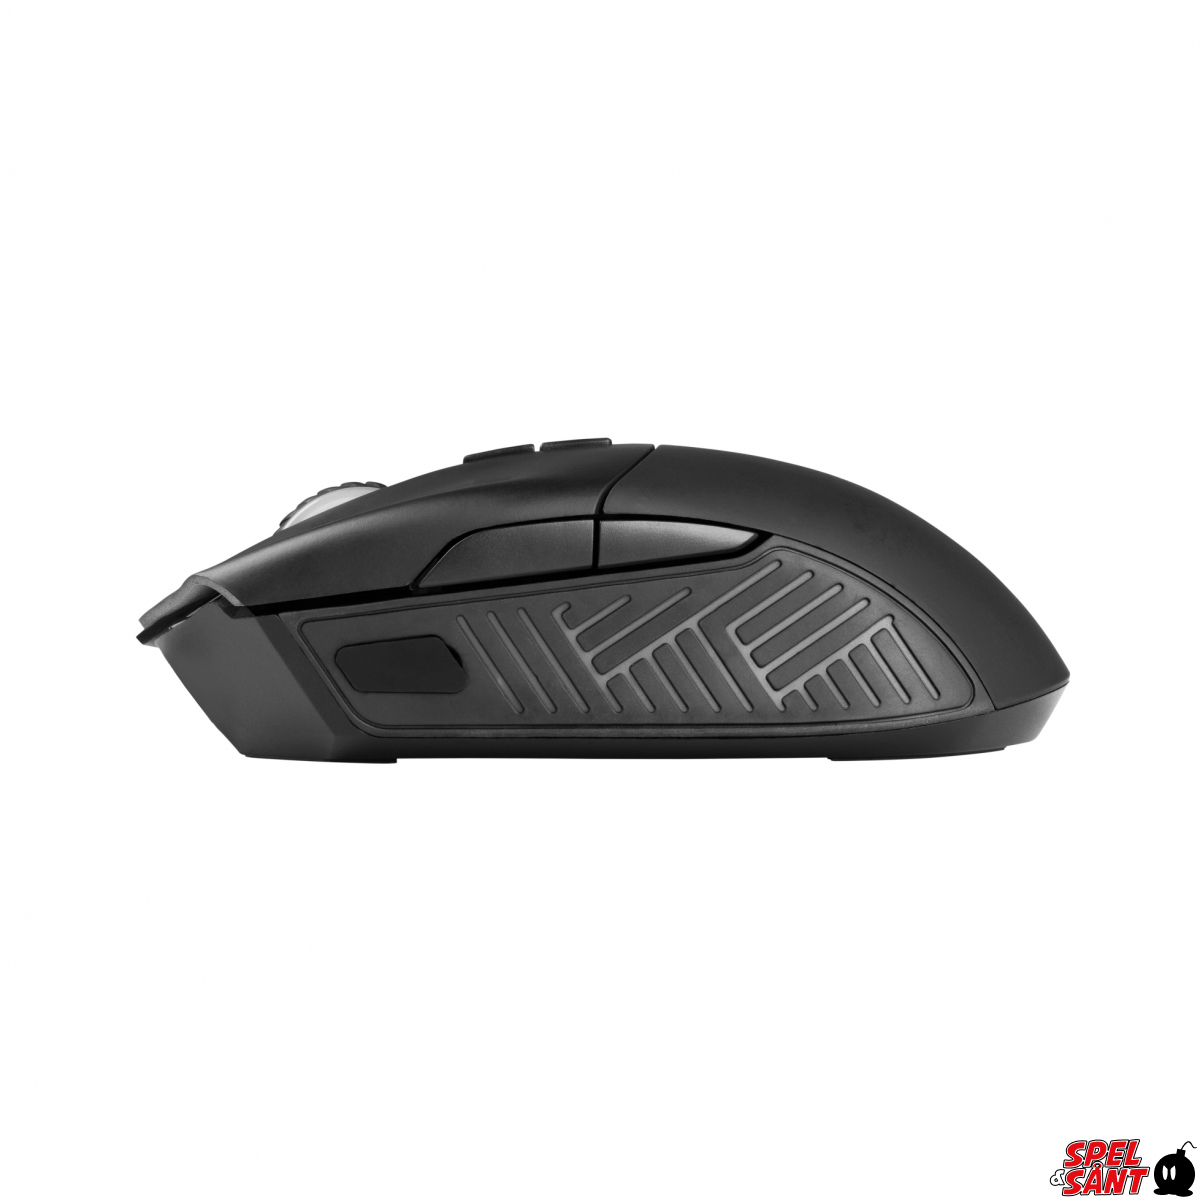 L33t Gaming We Are Vikings Odins Armory Draupnir Wireless Gaming Mouse ...